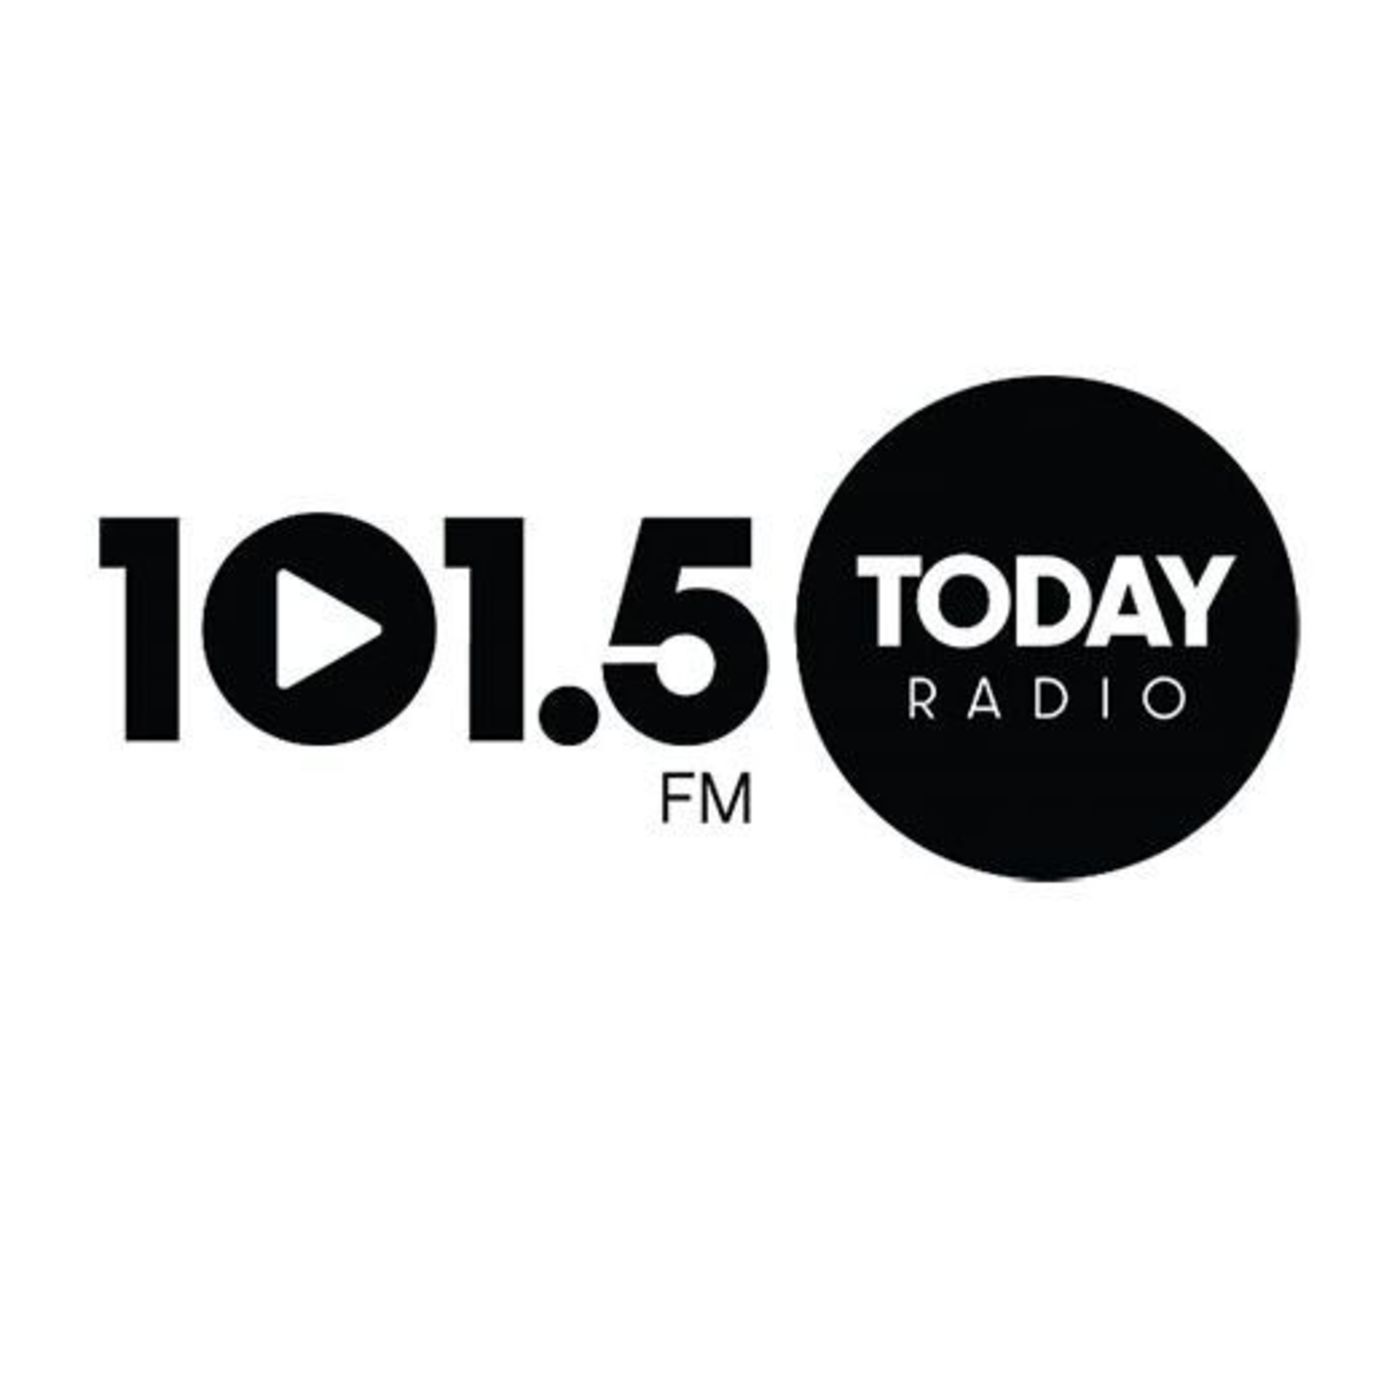 Jim Pattison Broadcast Group's Jamie Wall on 101.5 Today Radio's debut in Calgary